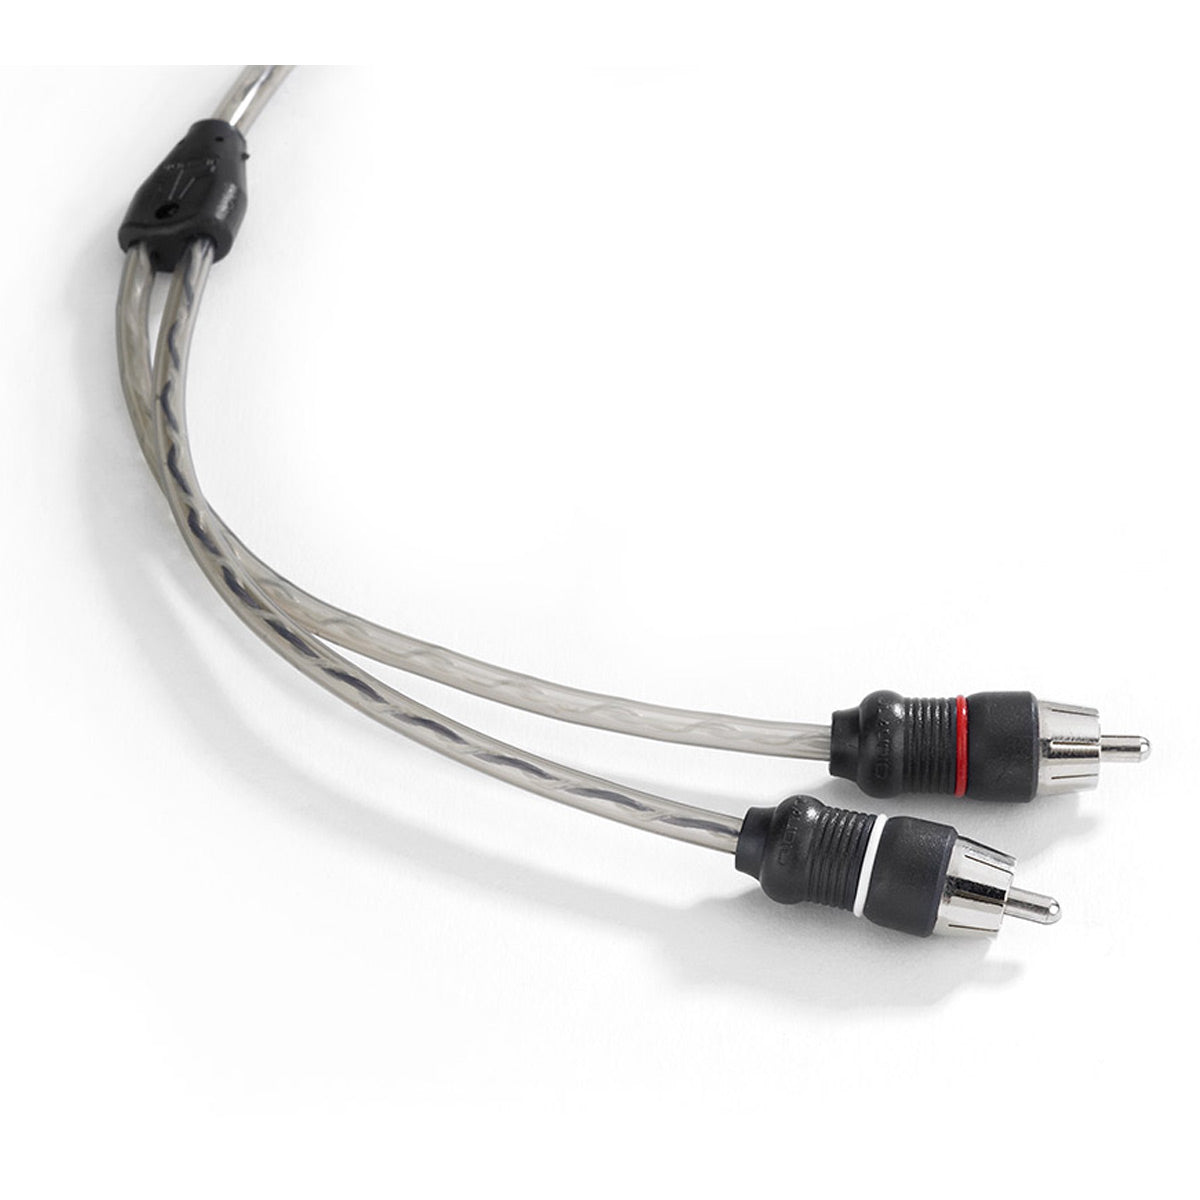 JL Audio Twisted-Pair RCA Male to RCA Male Cable - 18 ft. (5.49m)